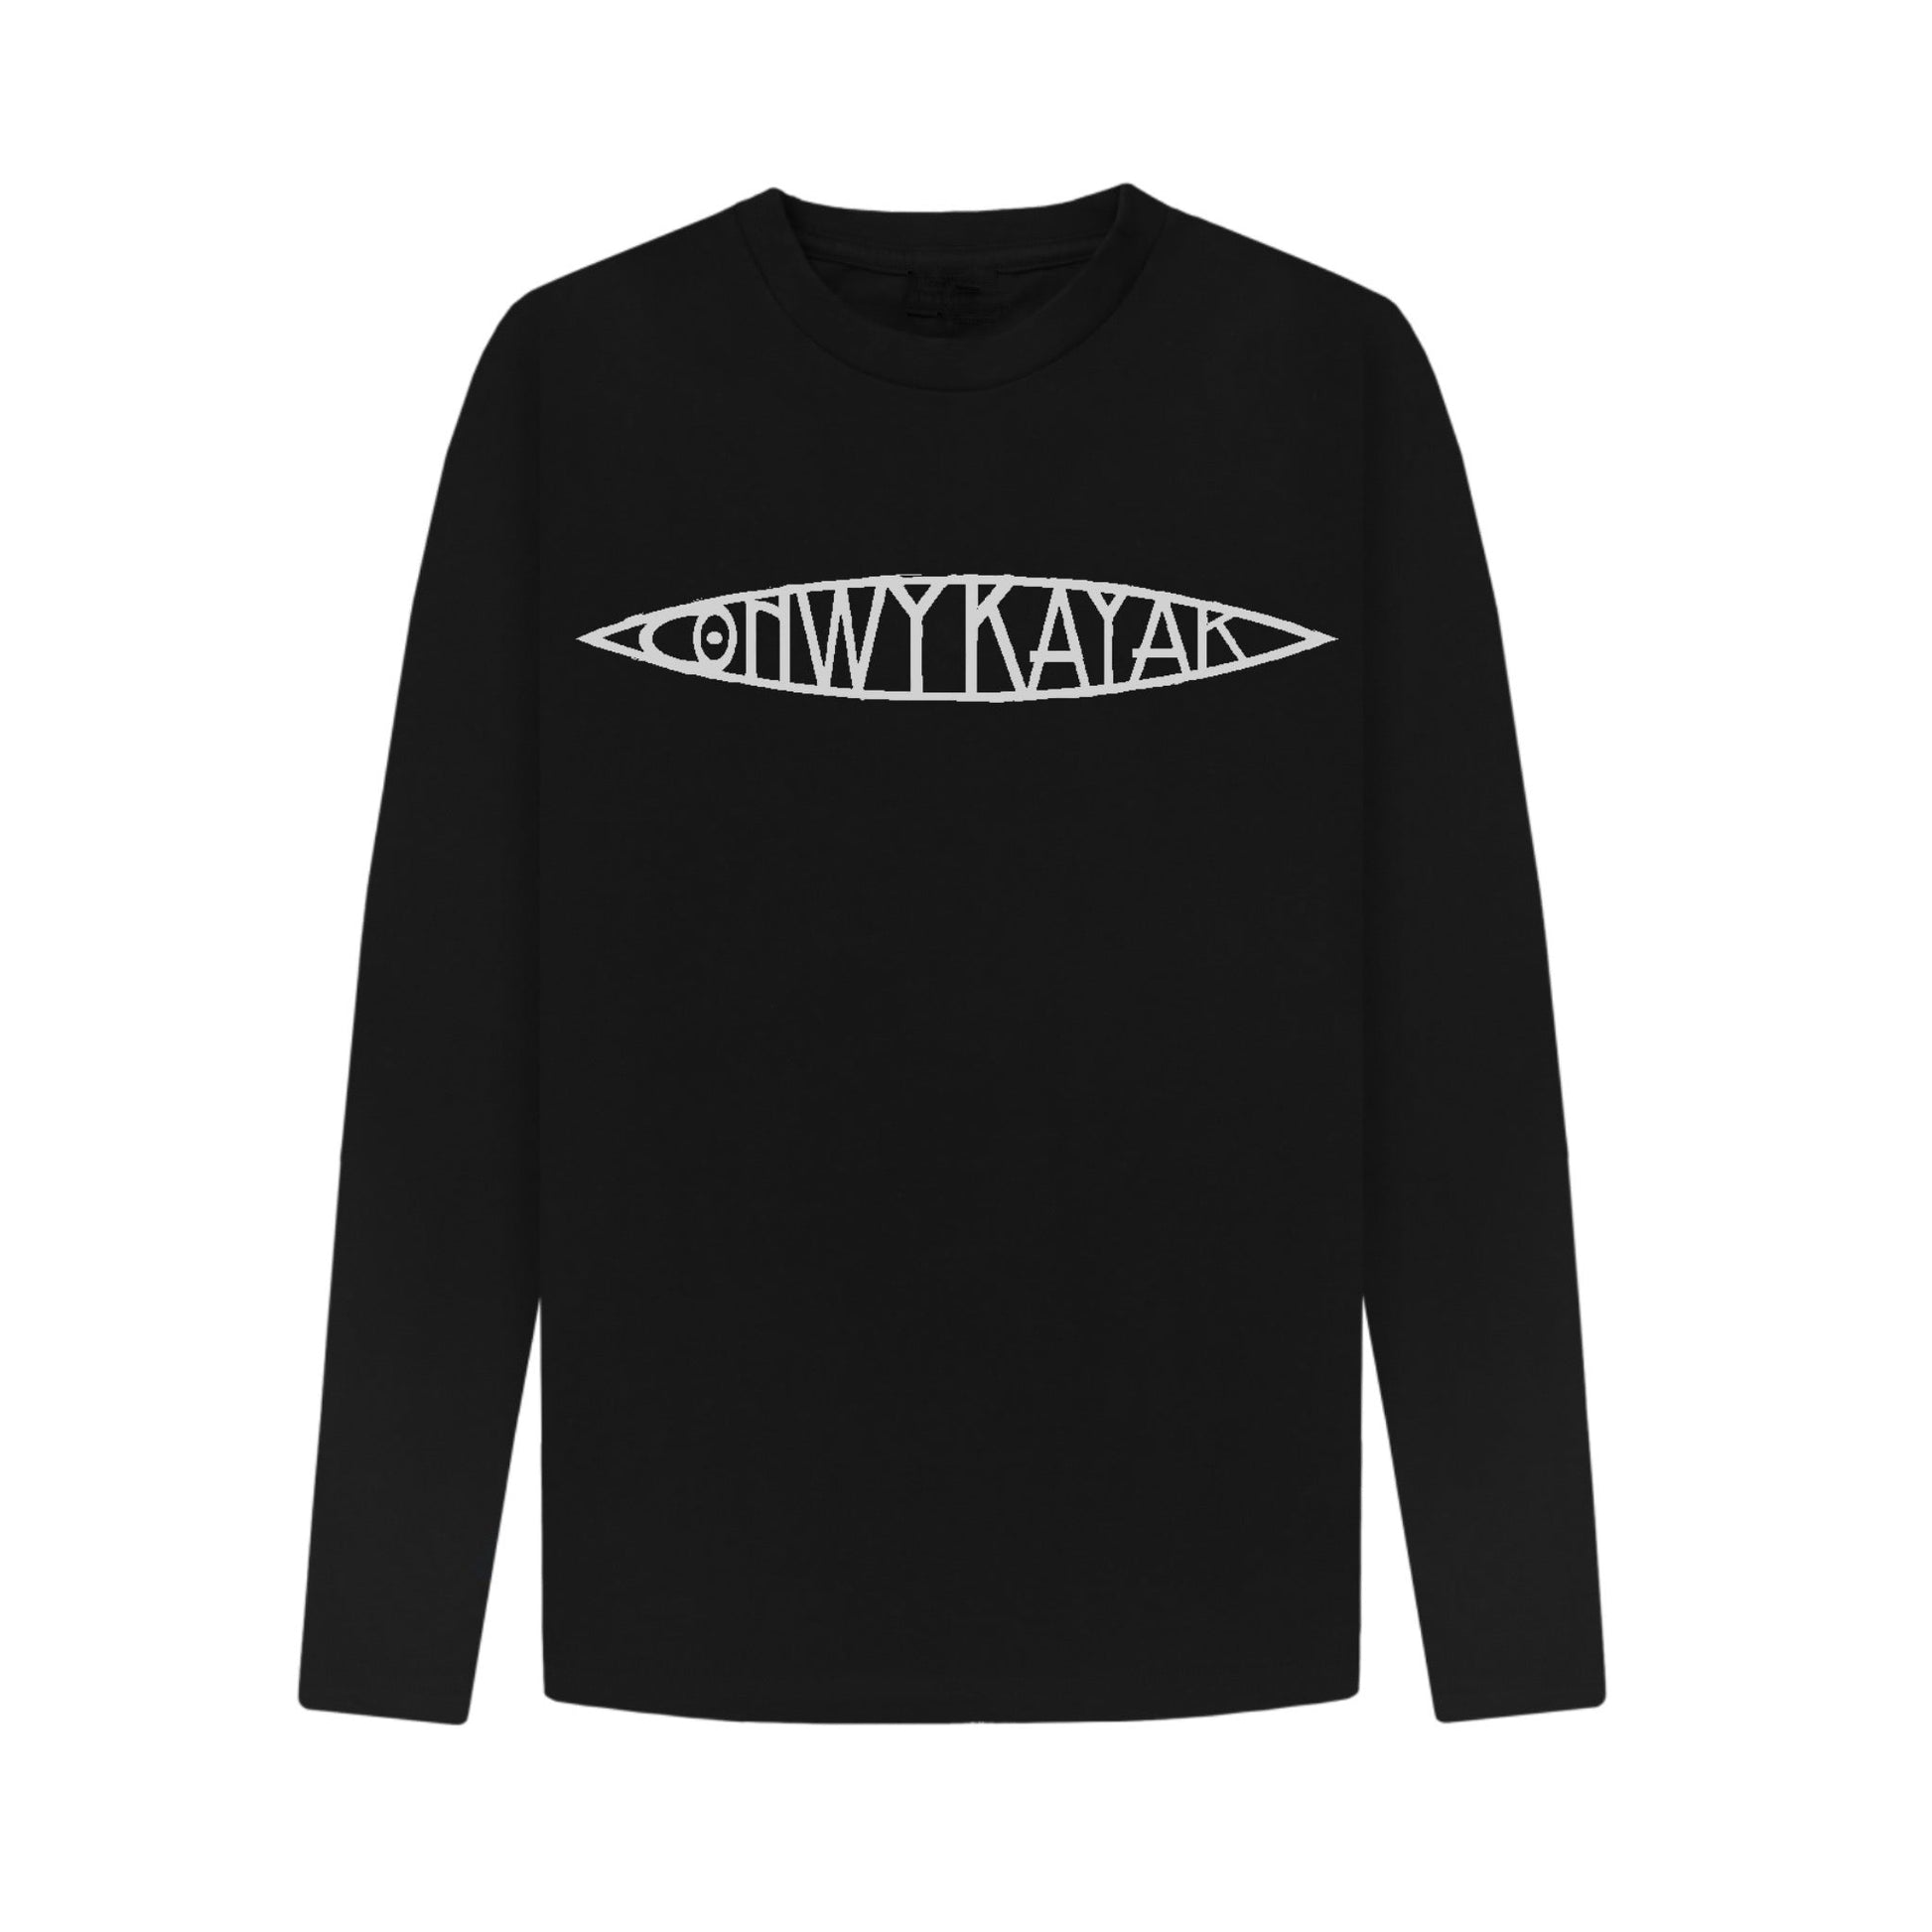 Conwy Kayak - Long Sleeve T-Shirt - 0